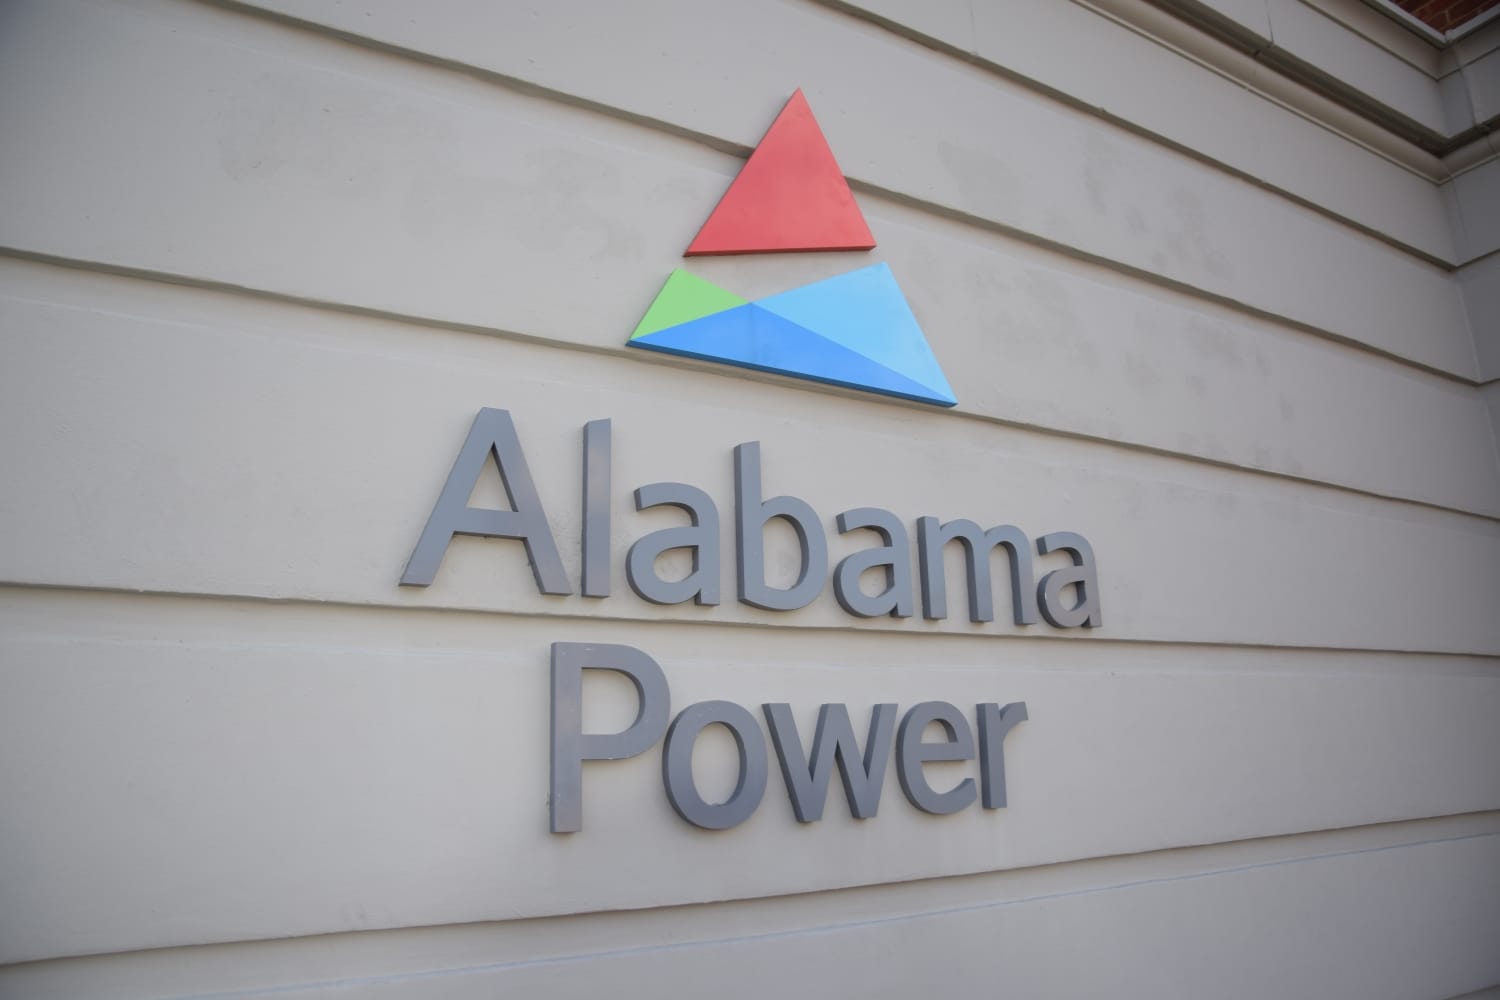 ‘Control the narrative’: How an Alabama utility wields influence by financing news